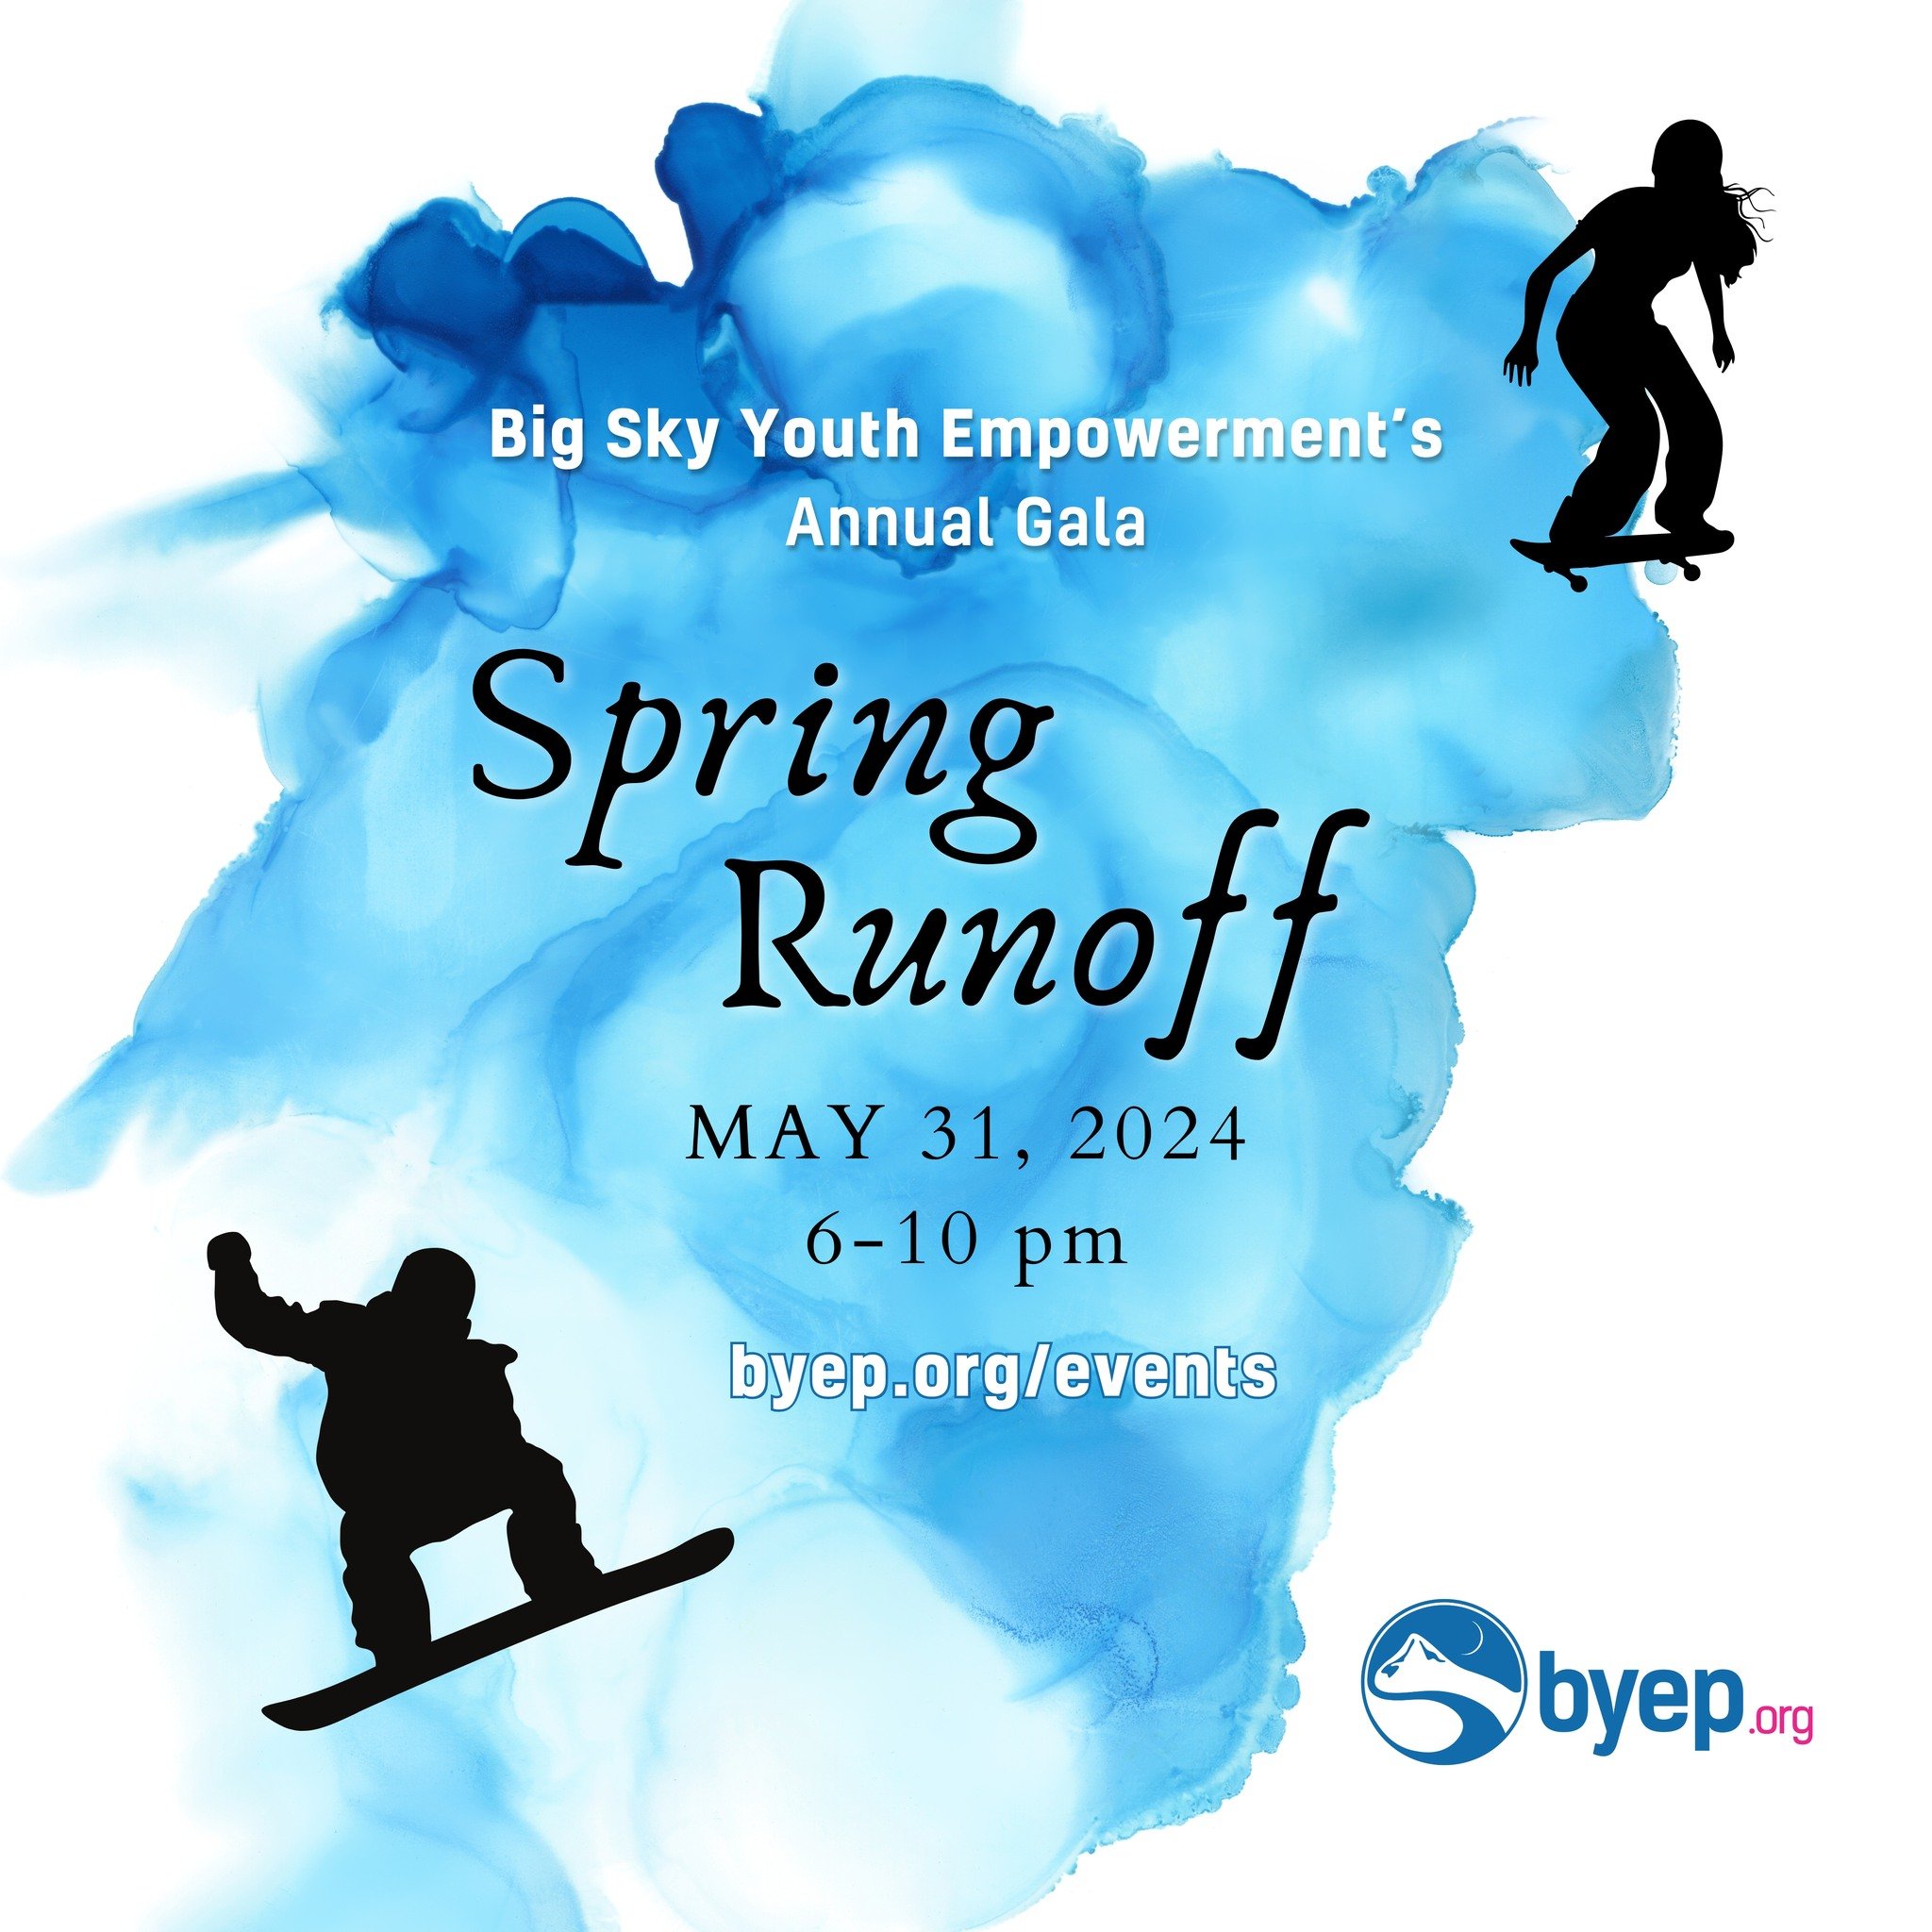 Spring is here! And with that, it's time for Big Sky Youth Empowerment's annual Spring Runoff gala on Friday, May 31, from 6-10 pm 💙🏂

BYEP invites you to join us on our mission to create transformative, even life-saving programs for vulnerable tee